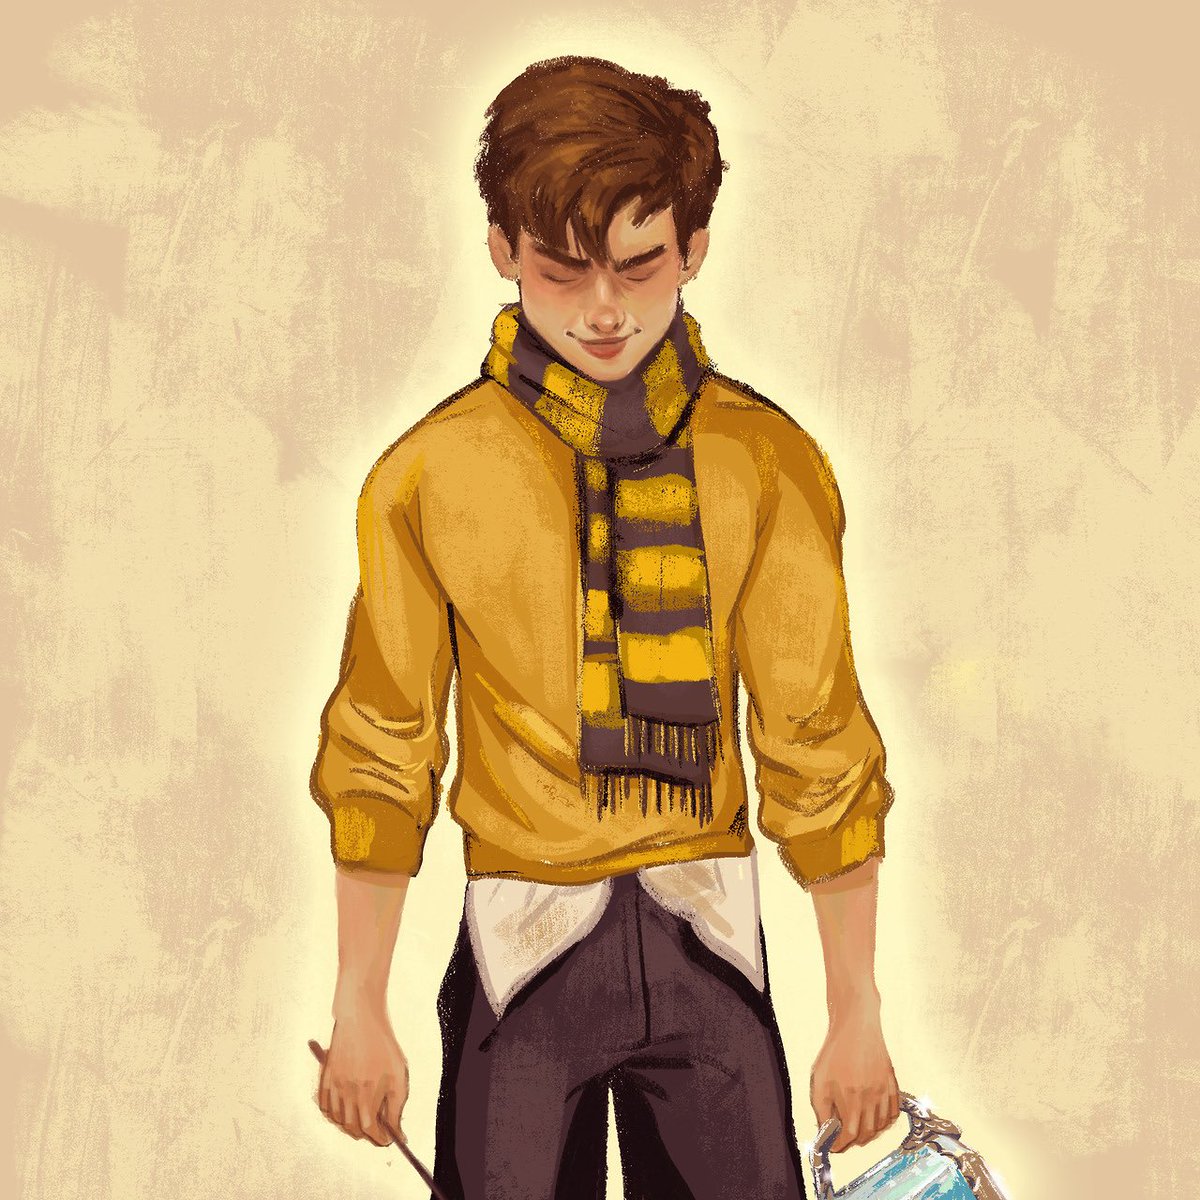 𝑪𝒆𝒅𝒓𝒊𝒄 𝑫𝒊𝒈𝒈𝒐𝒓𝒚, prefect during his fifth year, captain and seeker of the Hufflepuff quidditch team, former Triwizard Champion who was killed at the age of 17 by Peter Pettigrew, under orders of Lord Voldemort, on june 24th 1995.(art by irelandellisart on tumblr)